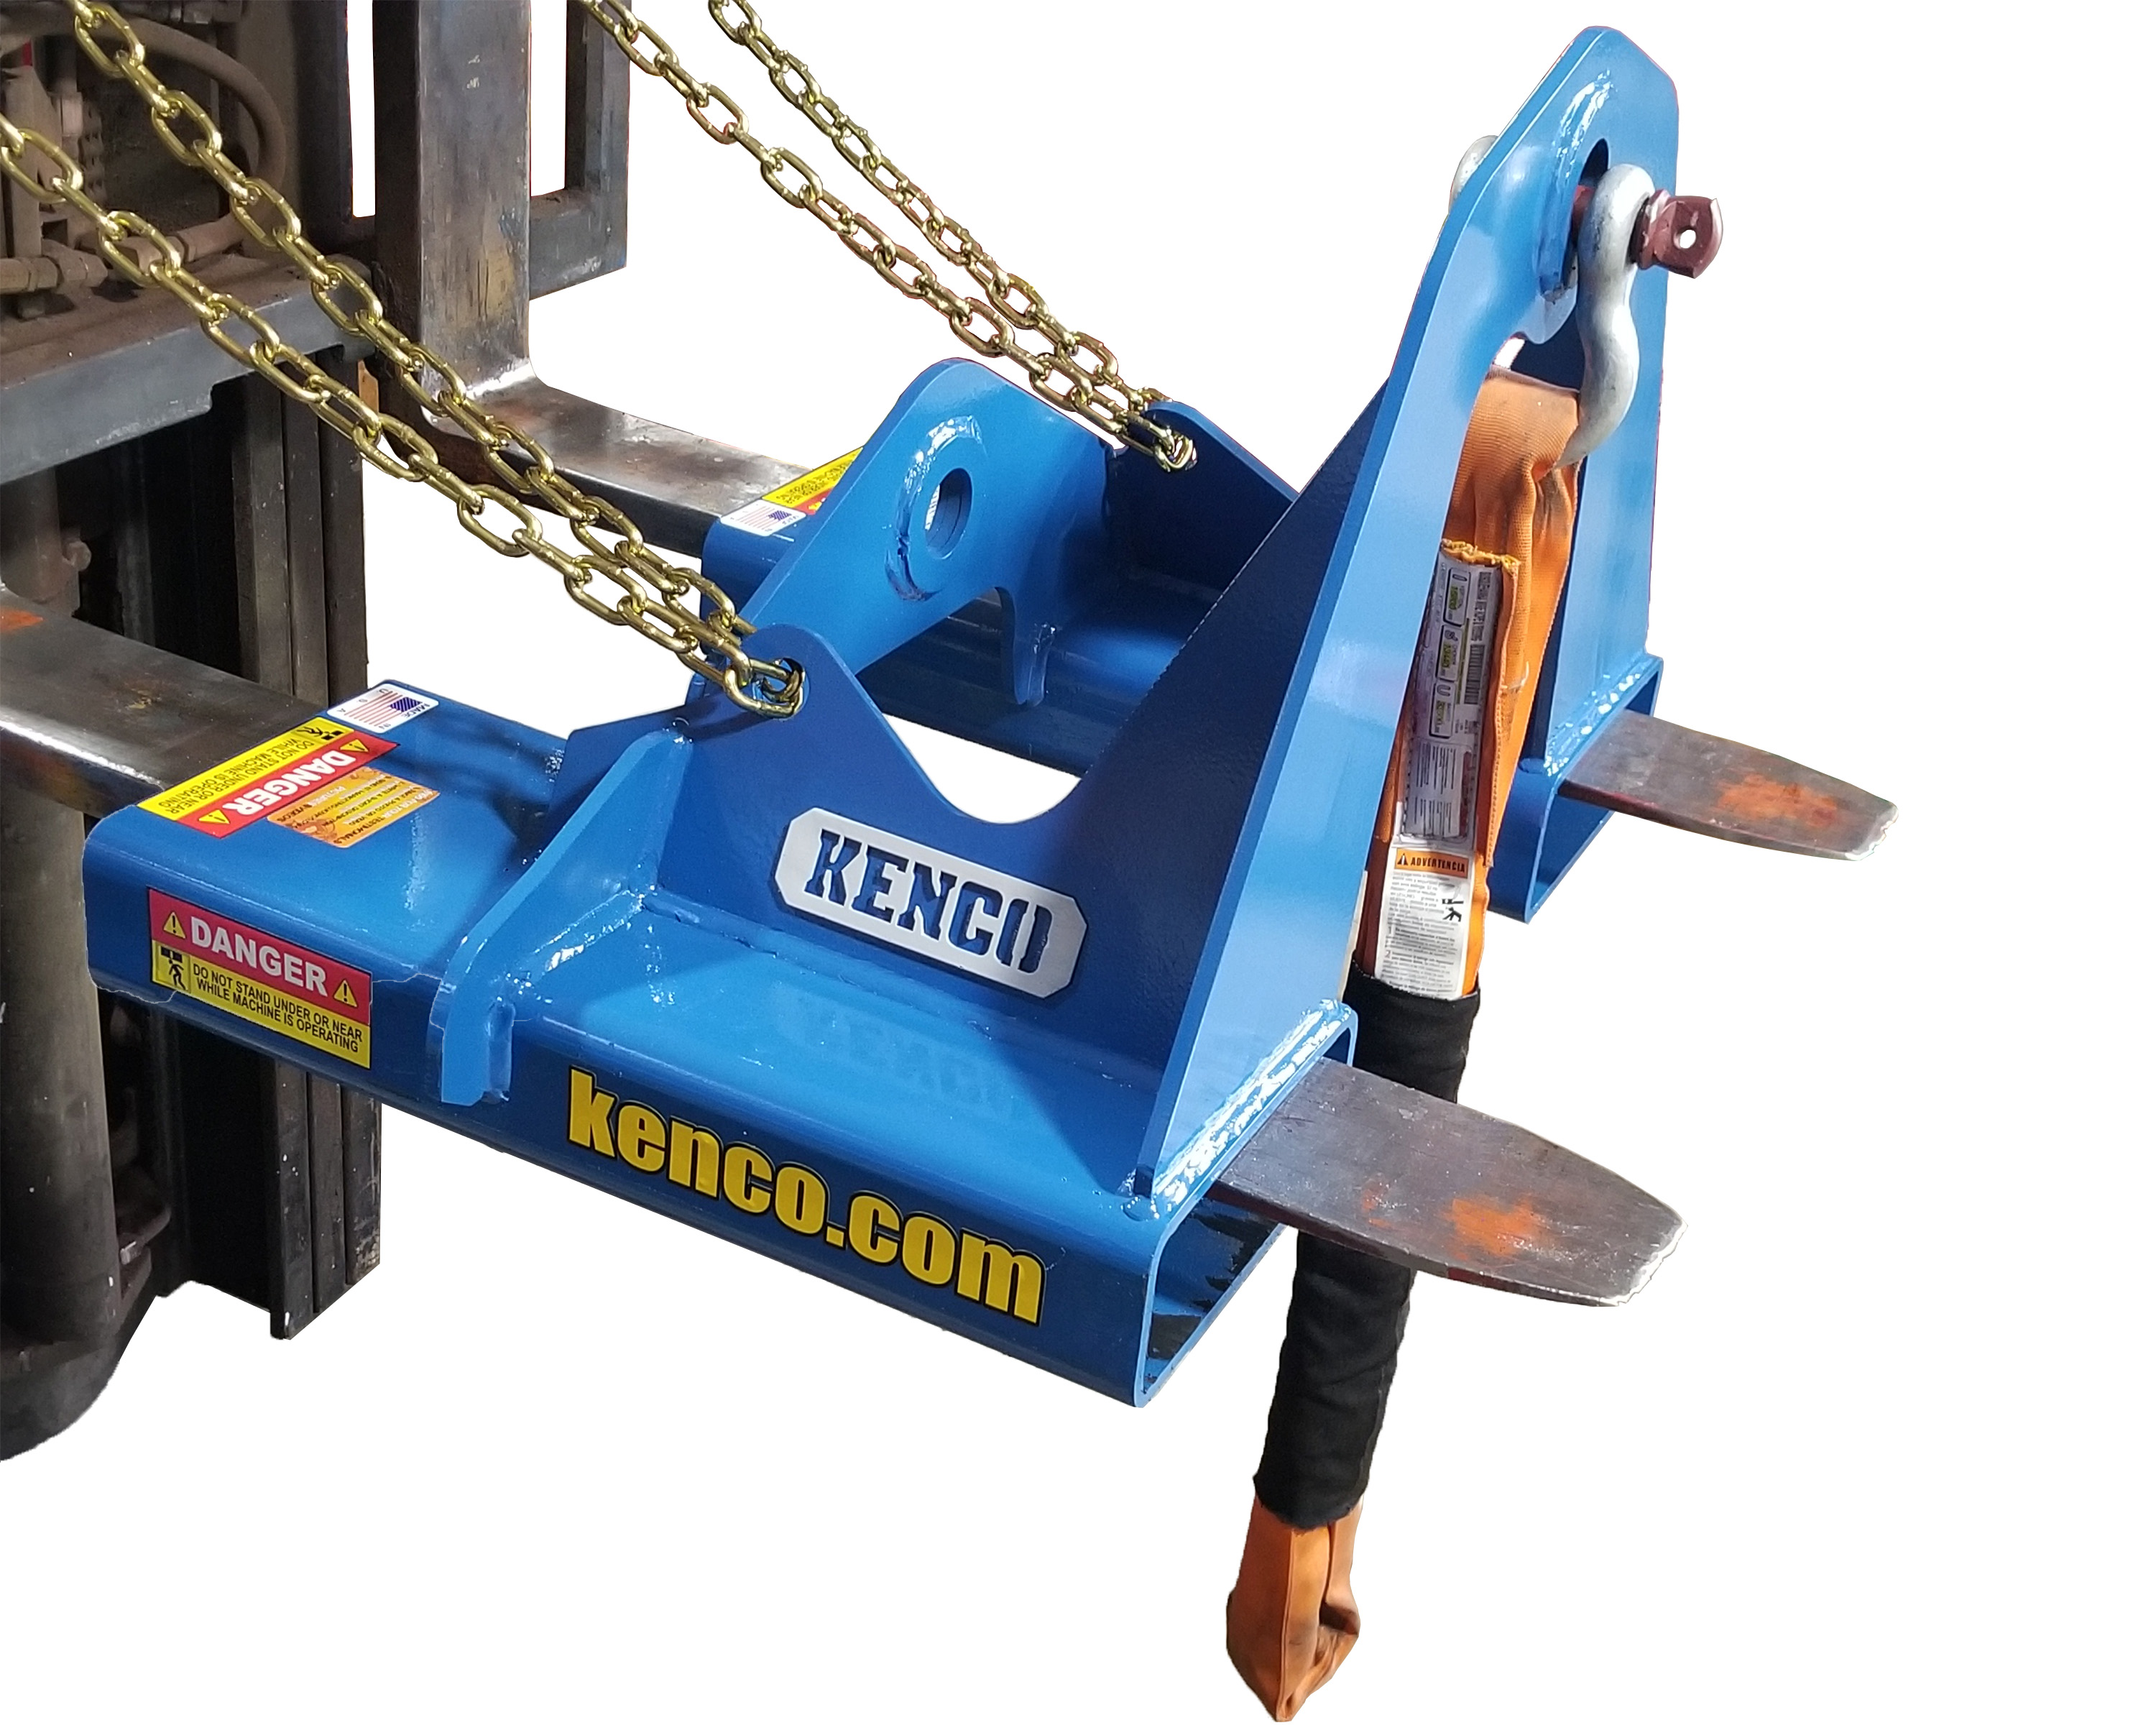 kenco-s-forklift-adapter-a-forklift-lifting-attachment-for-big-jobs